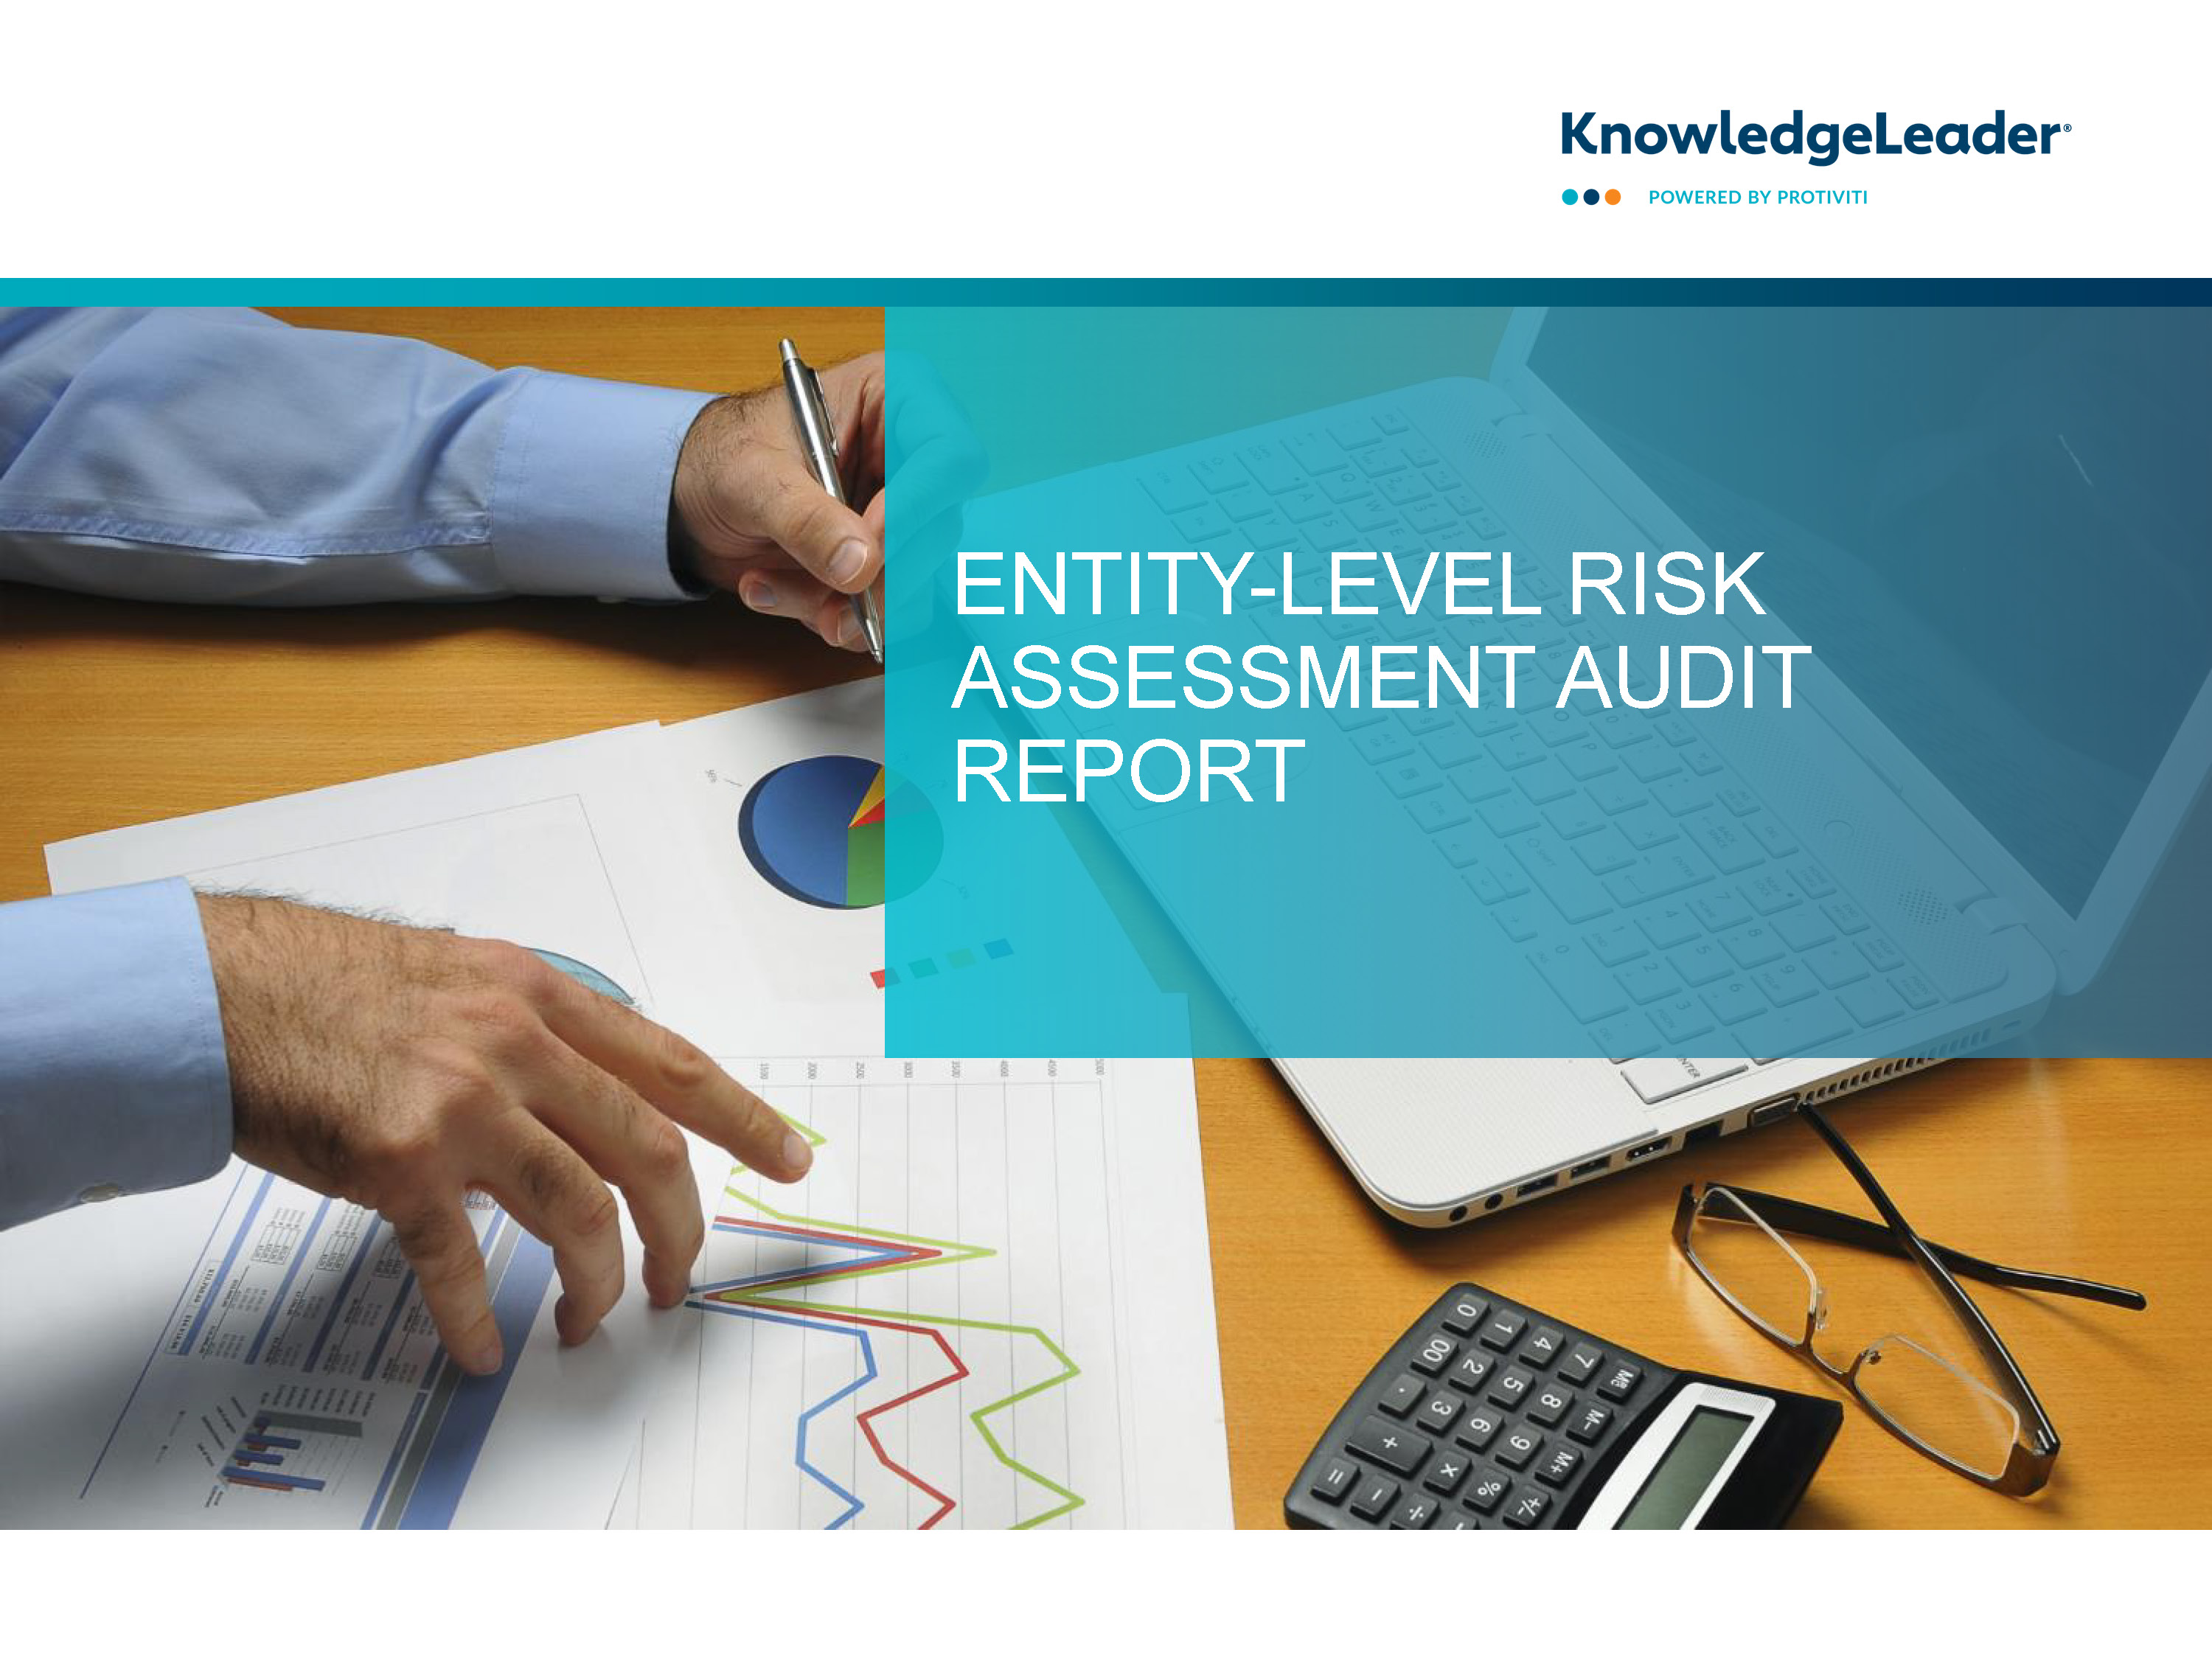 Screenshot of the first page of Entity-Level Risk Assessment Audit Report